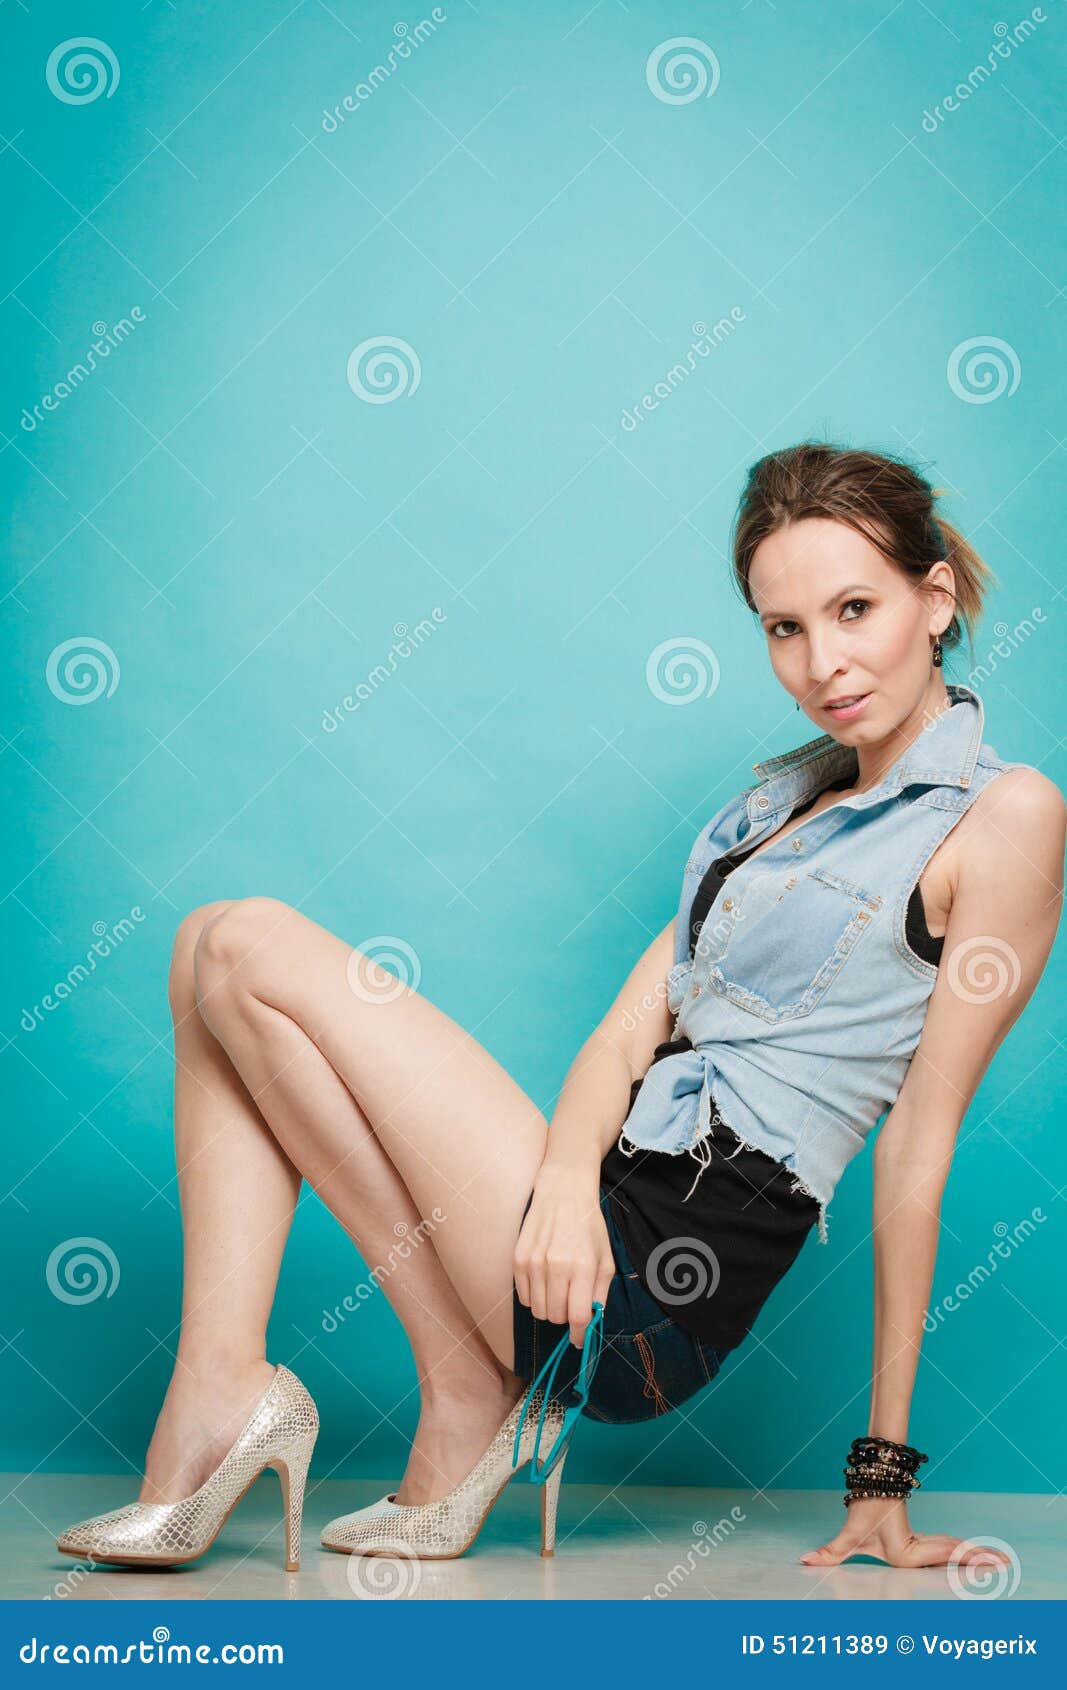 Summer Fashion Girl In Jeans Shirt Shorts And High Heels. Stock Photo ...